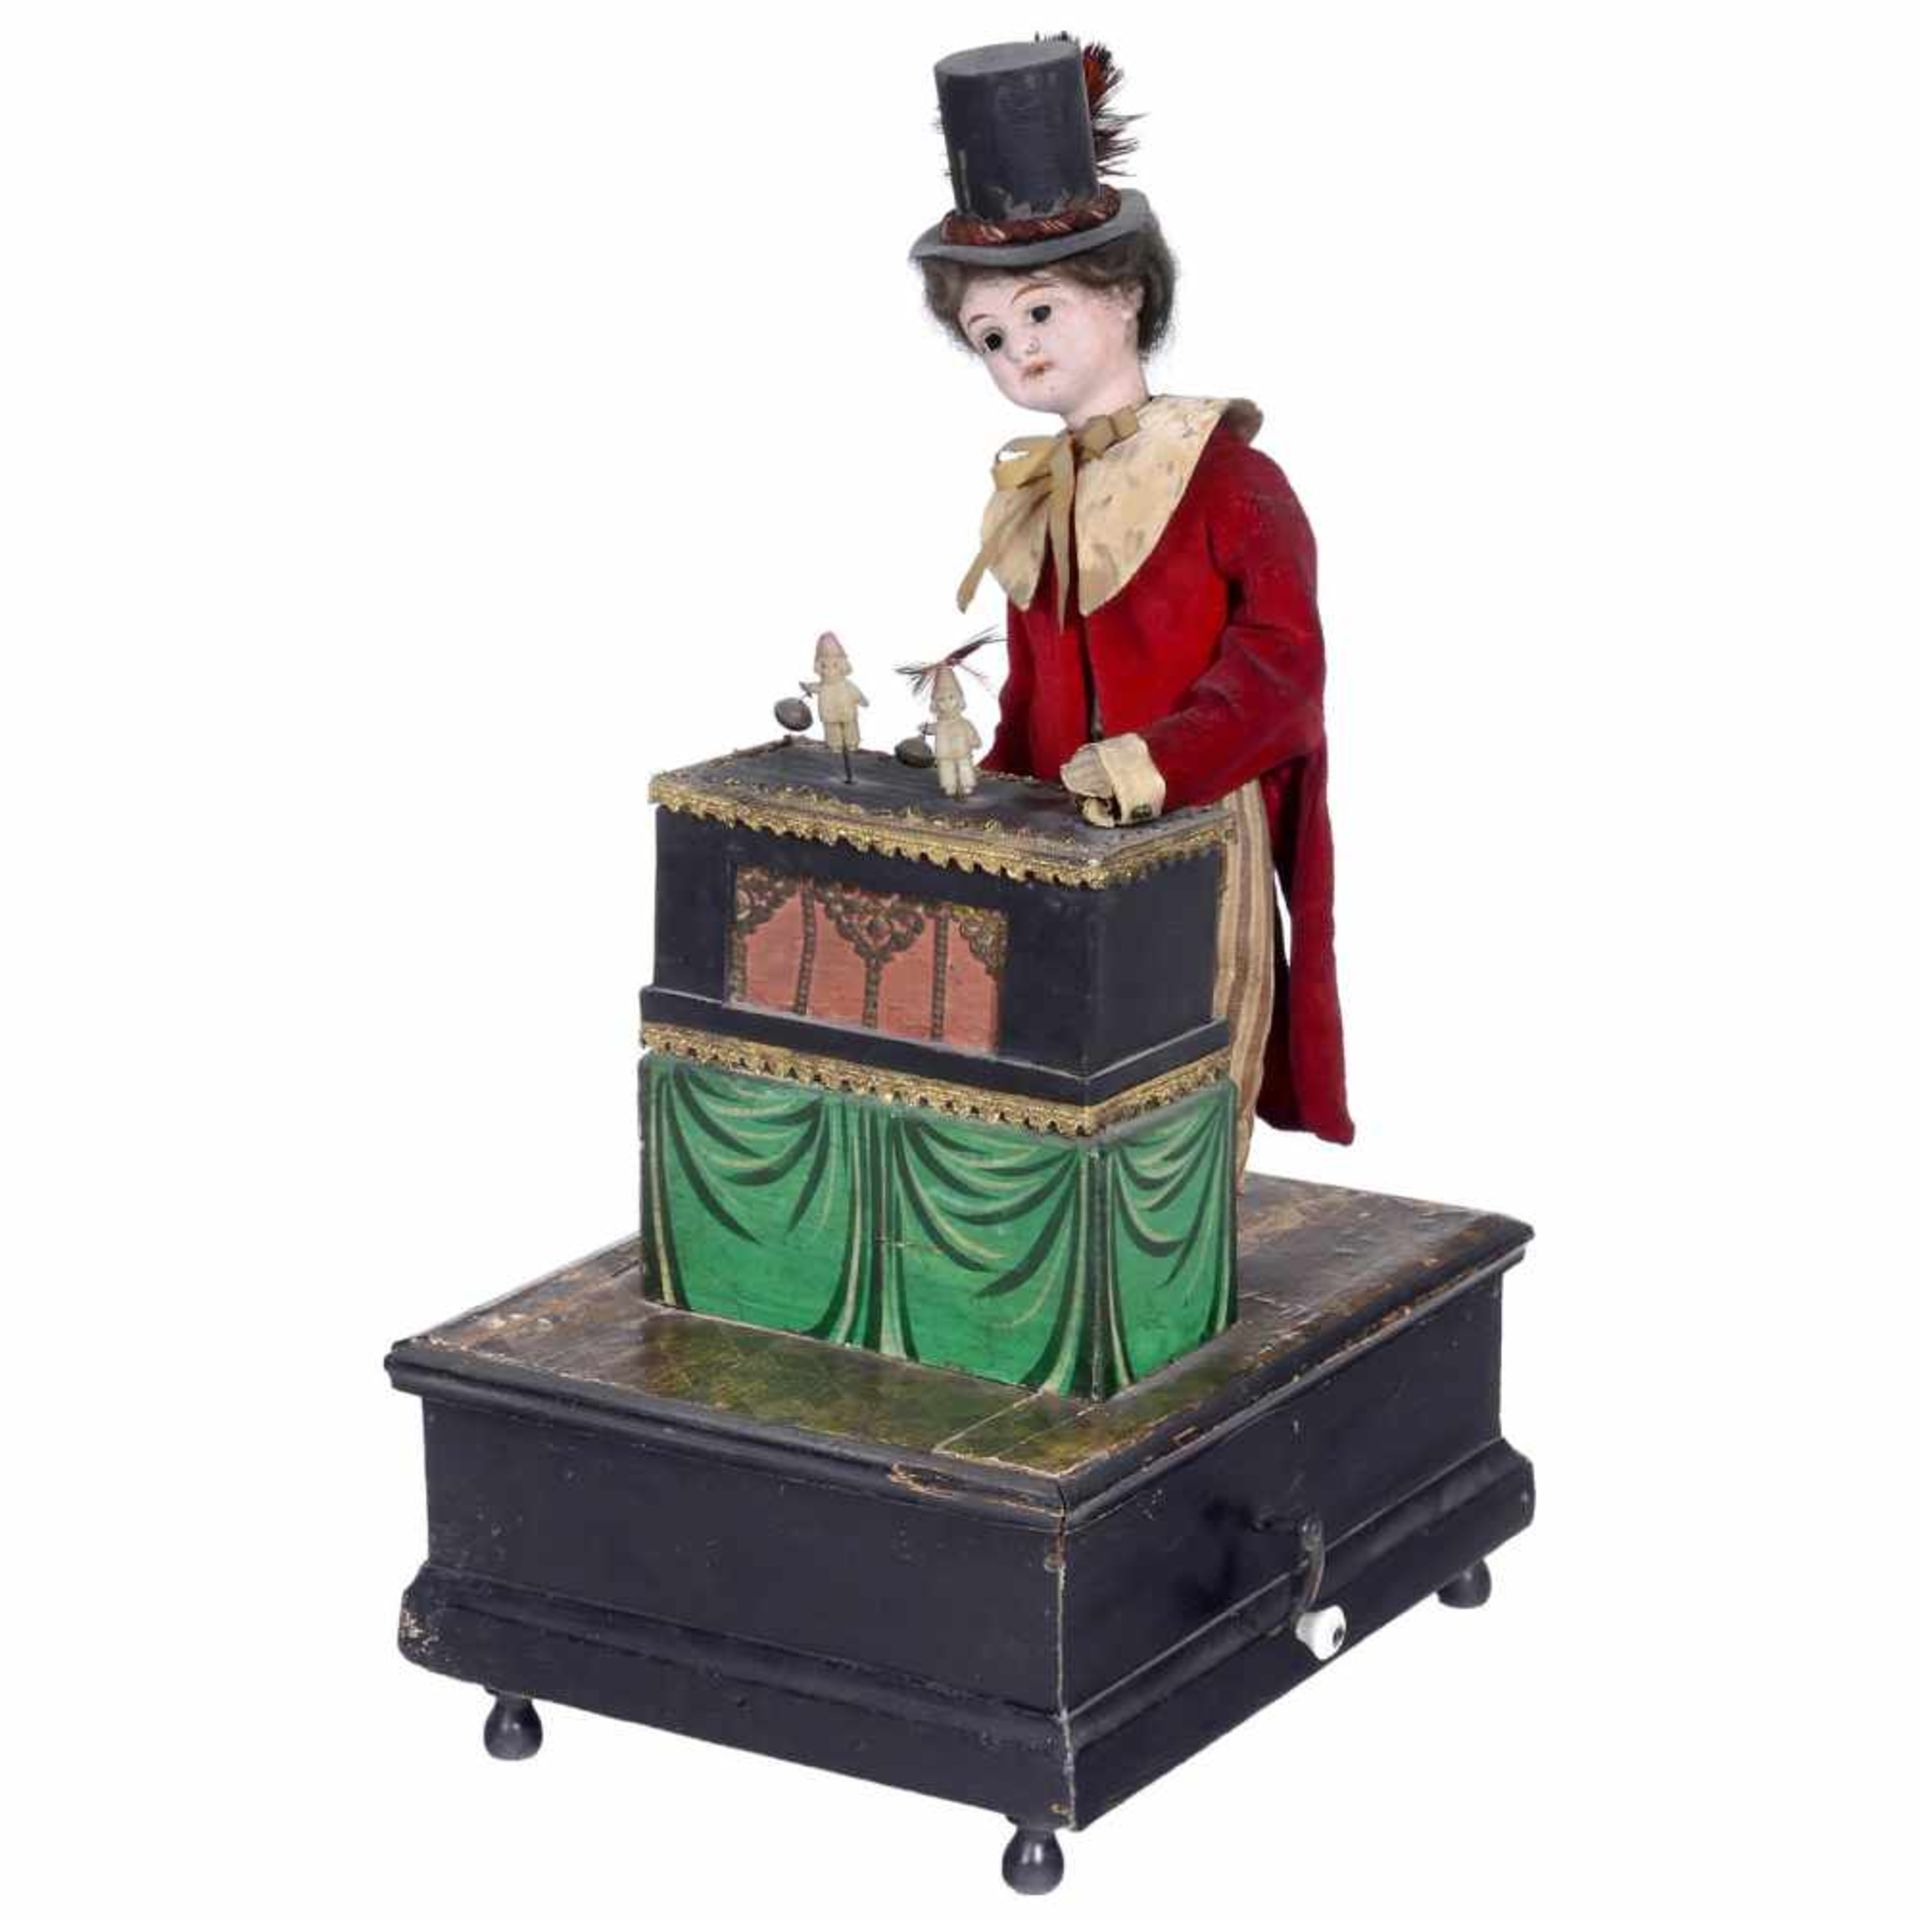 Part of an Early German Musical Manivelle Organ Grinder Automaton, c. 1880 onwardsWith original